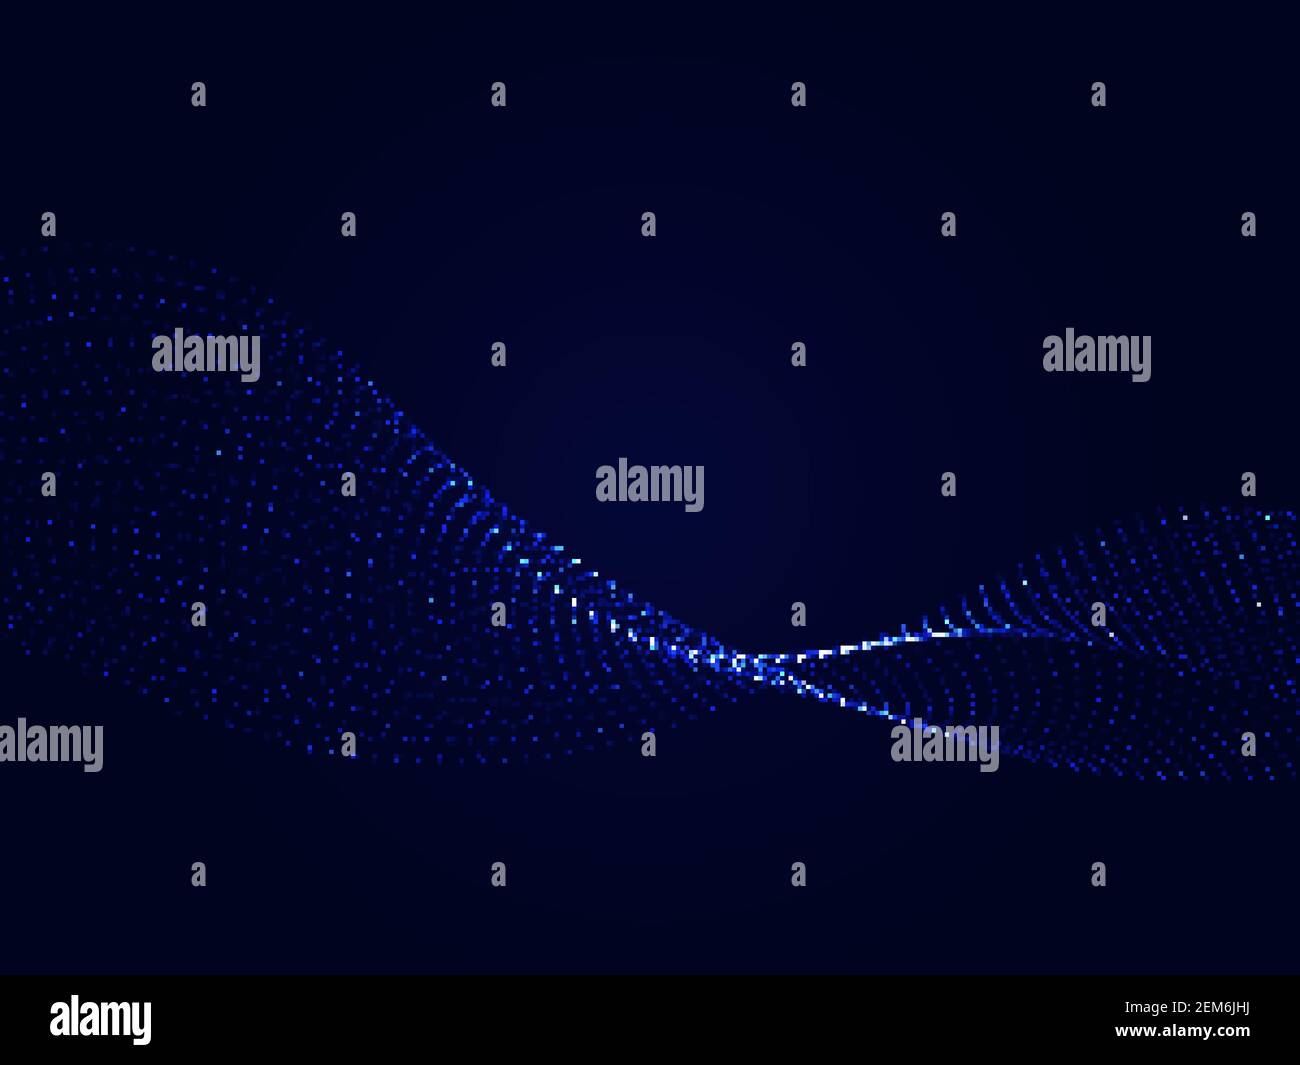 Vector design element. Flowing particle waves. Abstract background Wave of blue particles Digital data structure composed of dotted elements Stock Vector